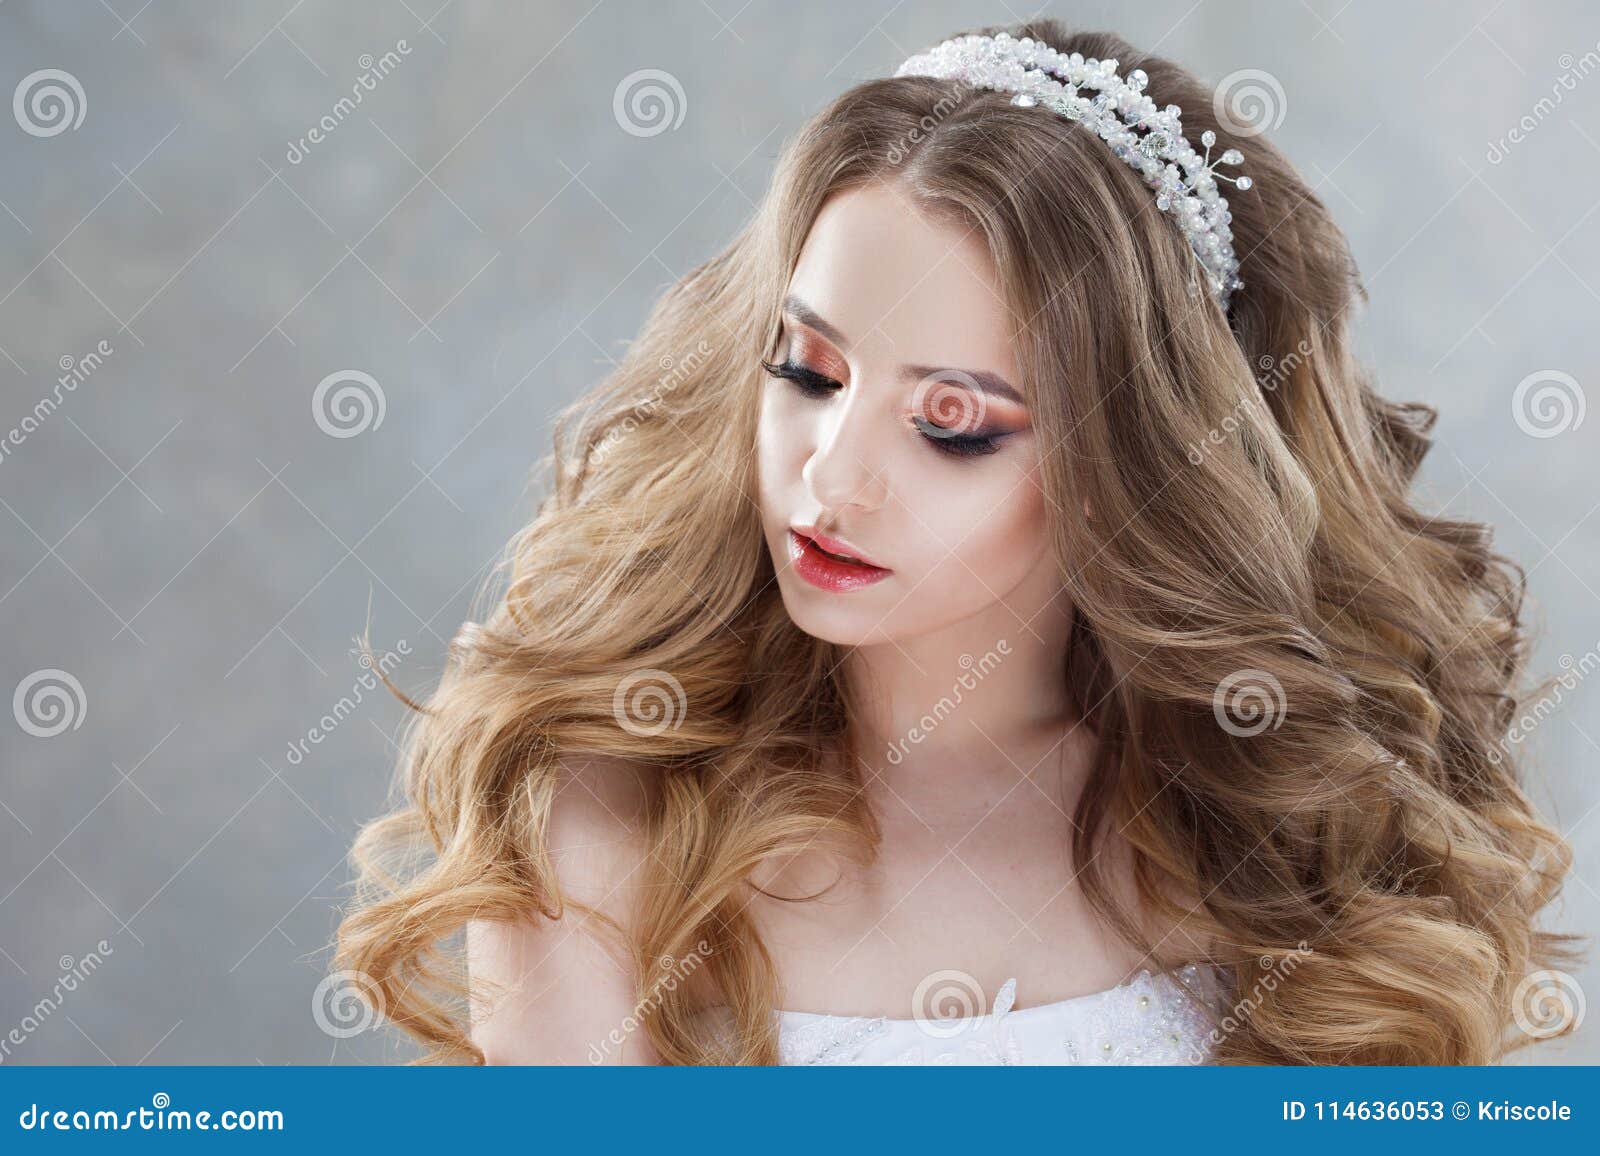 Bridal hairstyles with tiara ideas and pretty pictures